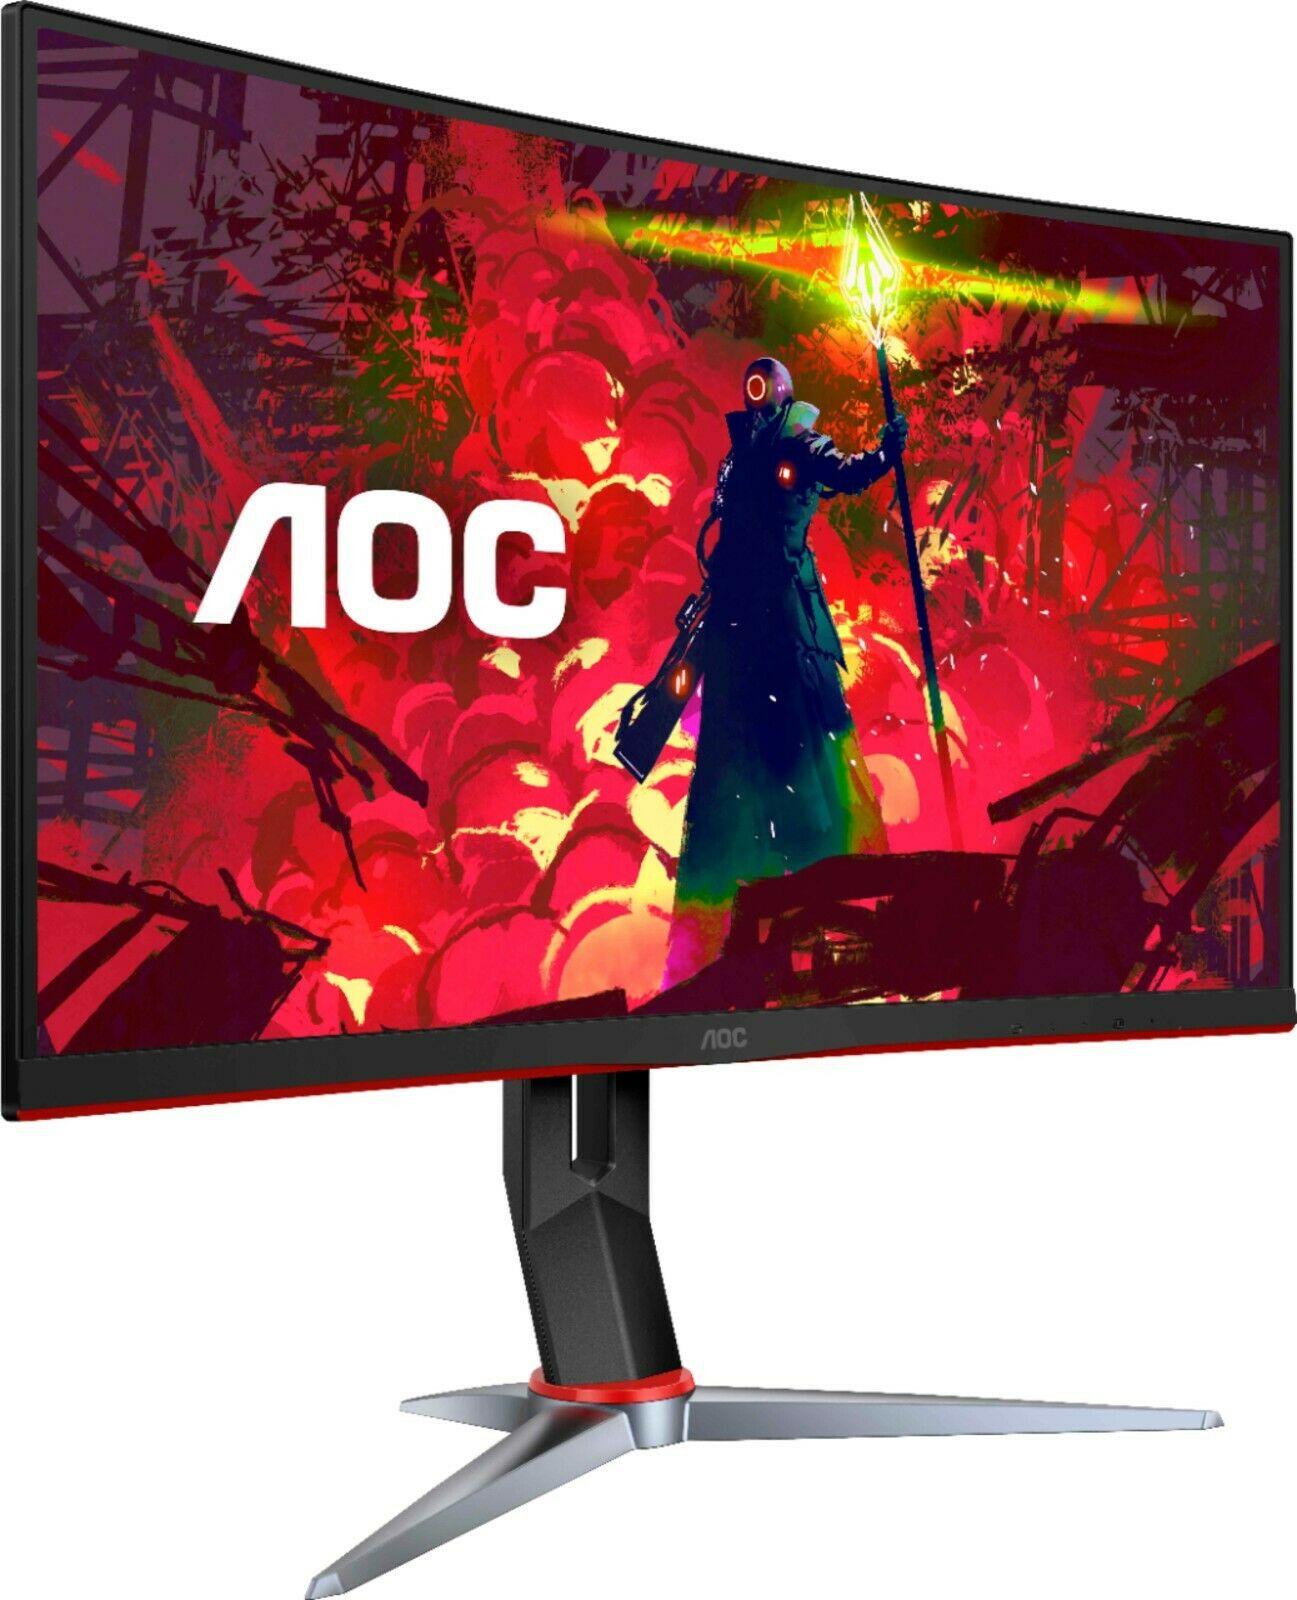 Aoc C27g2 27" Curved Gaming Monitor Fhd, 1500r Curved Va,1ms, 165hz (renewed)